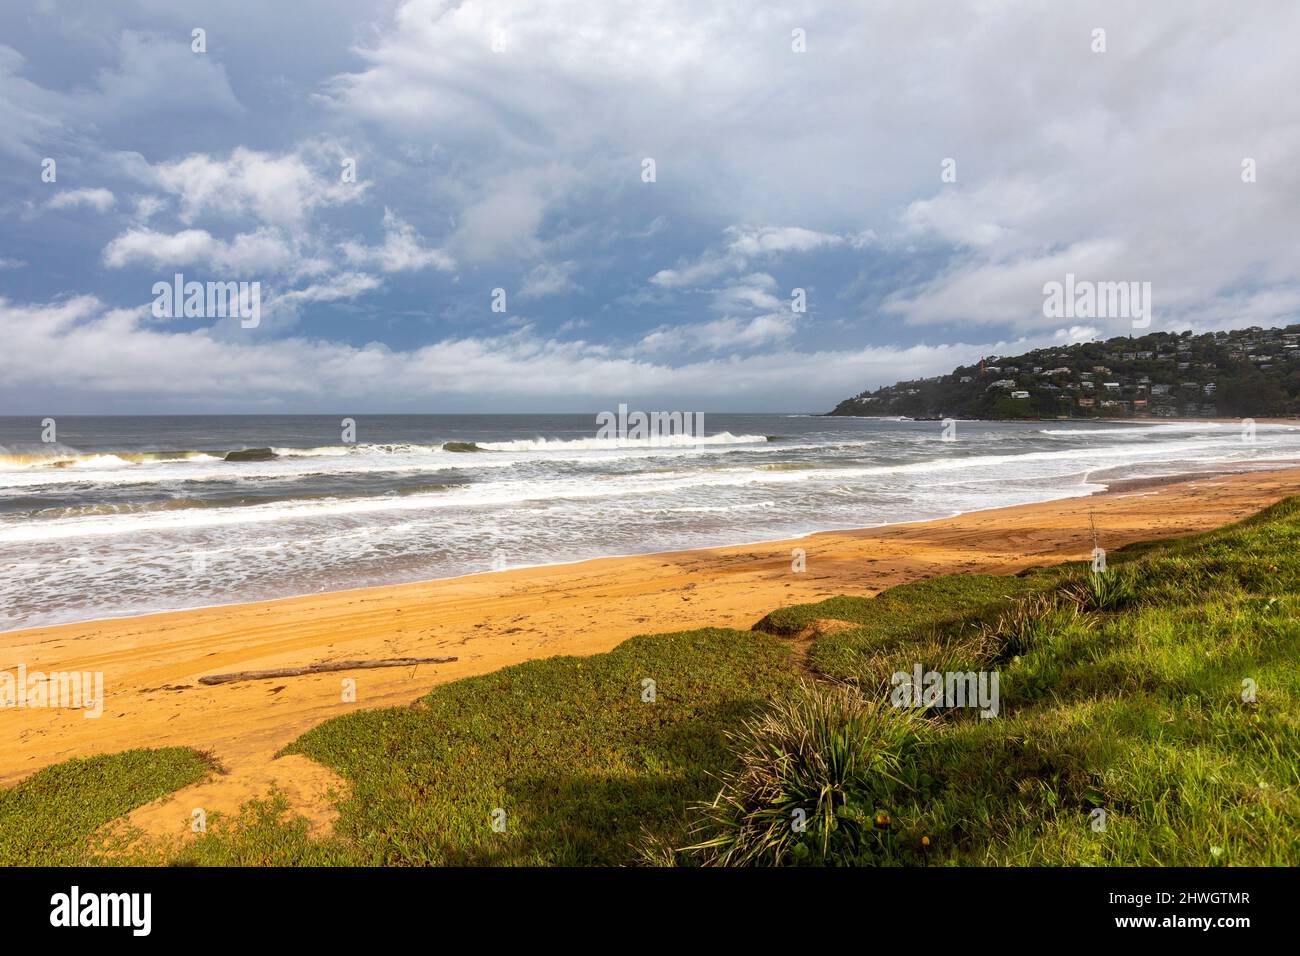 Sydney, Australia. 06th Mar, 2022. The low pressure system along the east coast of Australia will continue into next week as heavy rains and floods affect communities in New South Wales and Queensland. Pictured Palm Beach in Sydney with debris strewn across the beach from the stormy weather and strong surf conditions, Credit Martin Berry@alamy live news. Credit: martin berry/Alamy Live News Stock Photo